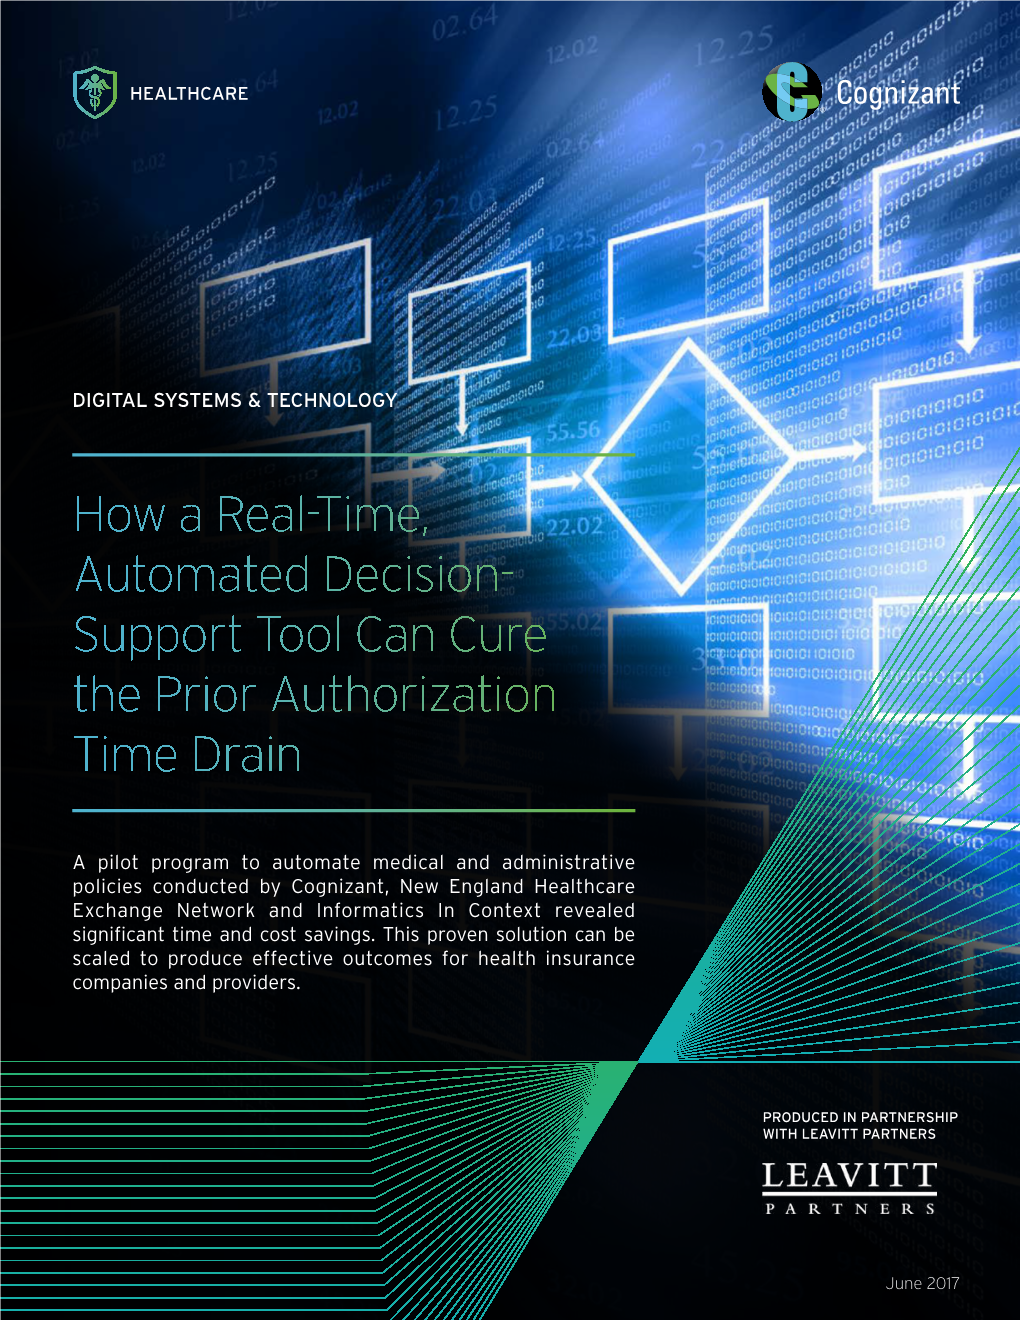 How a Real-Time Automated Decision-Support Tool Can